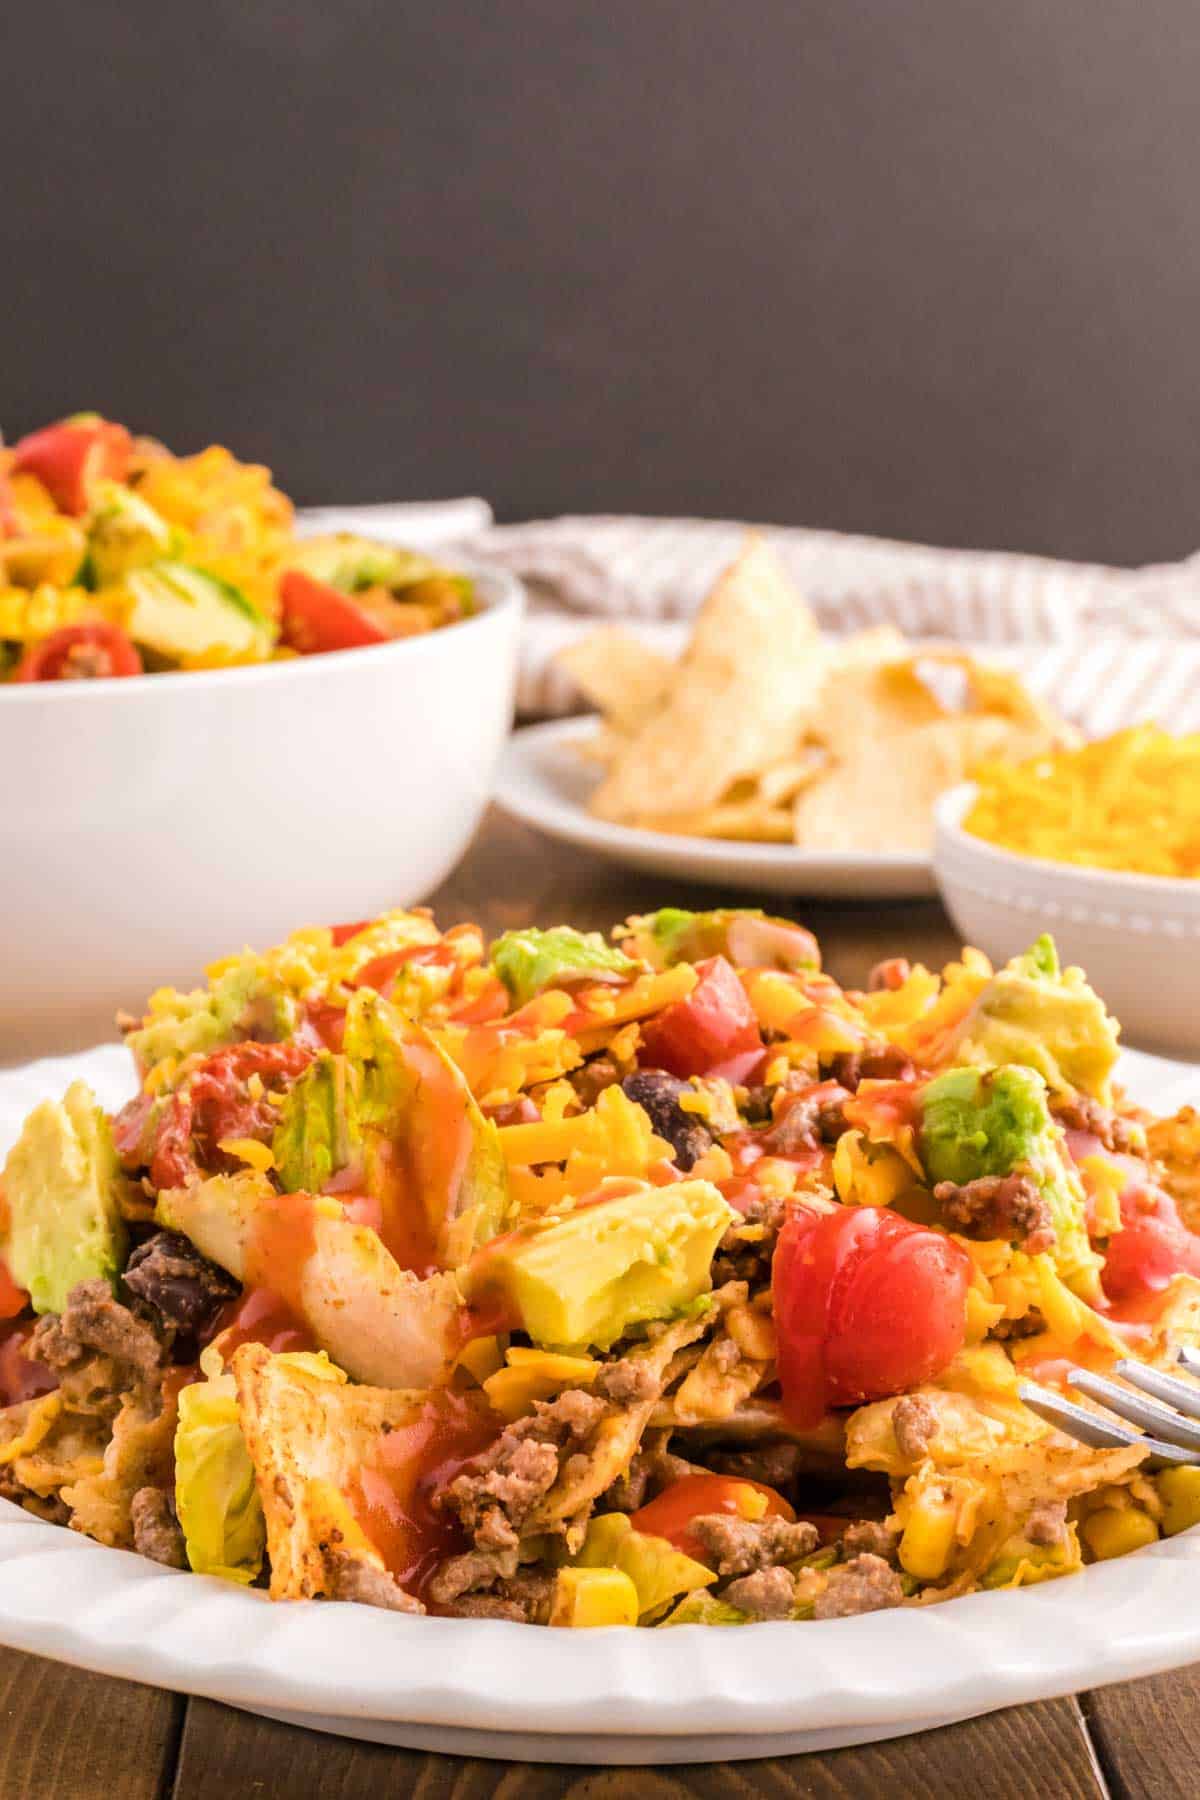 Taco Salad with Catalina Dressing is a hearty salad recipe loaded with taco seasoned ground beef, romaine lettuce, cherry tomatoes, cheddar cheese, crushed tortilla chips, corn, black bean and diced avocados all tossed in a sour cream and Catalina based dressing.